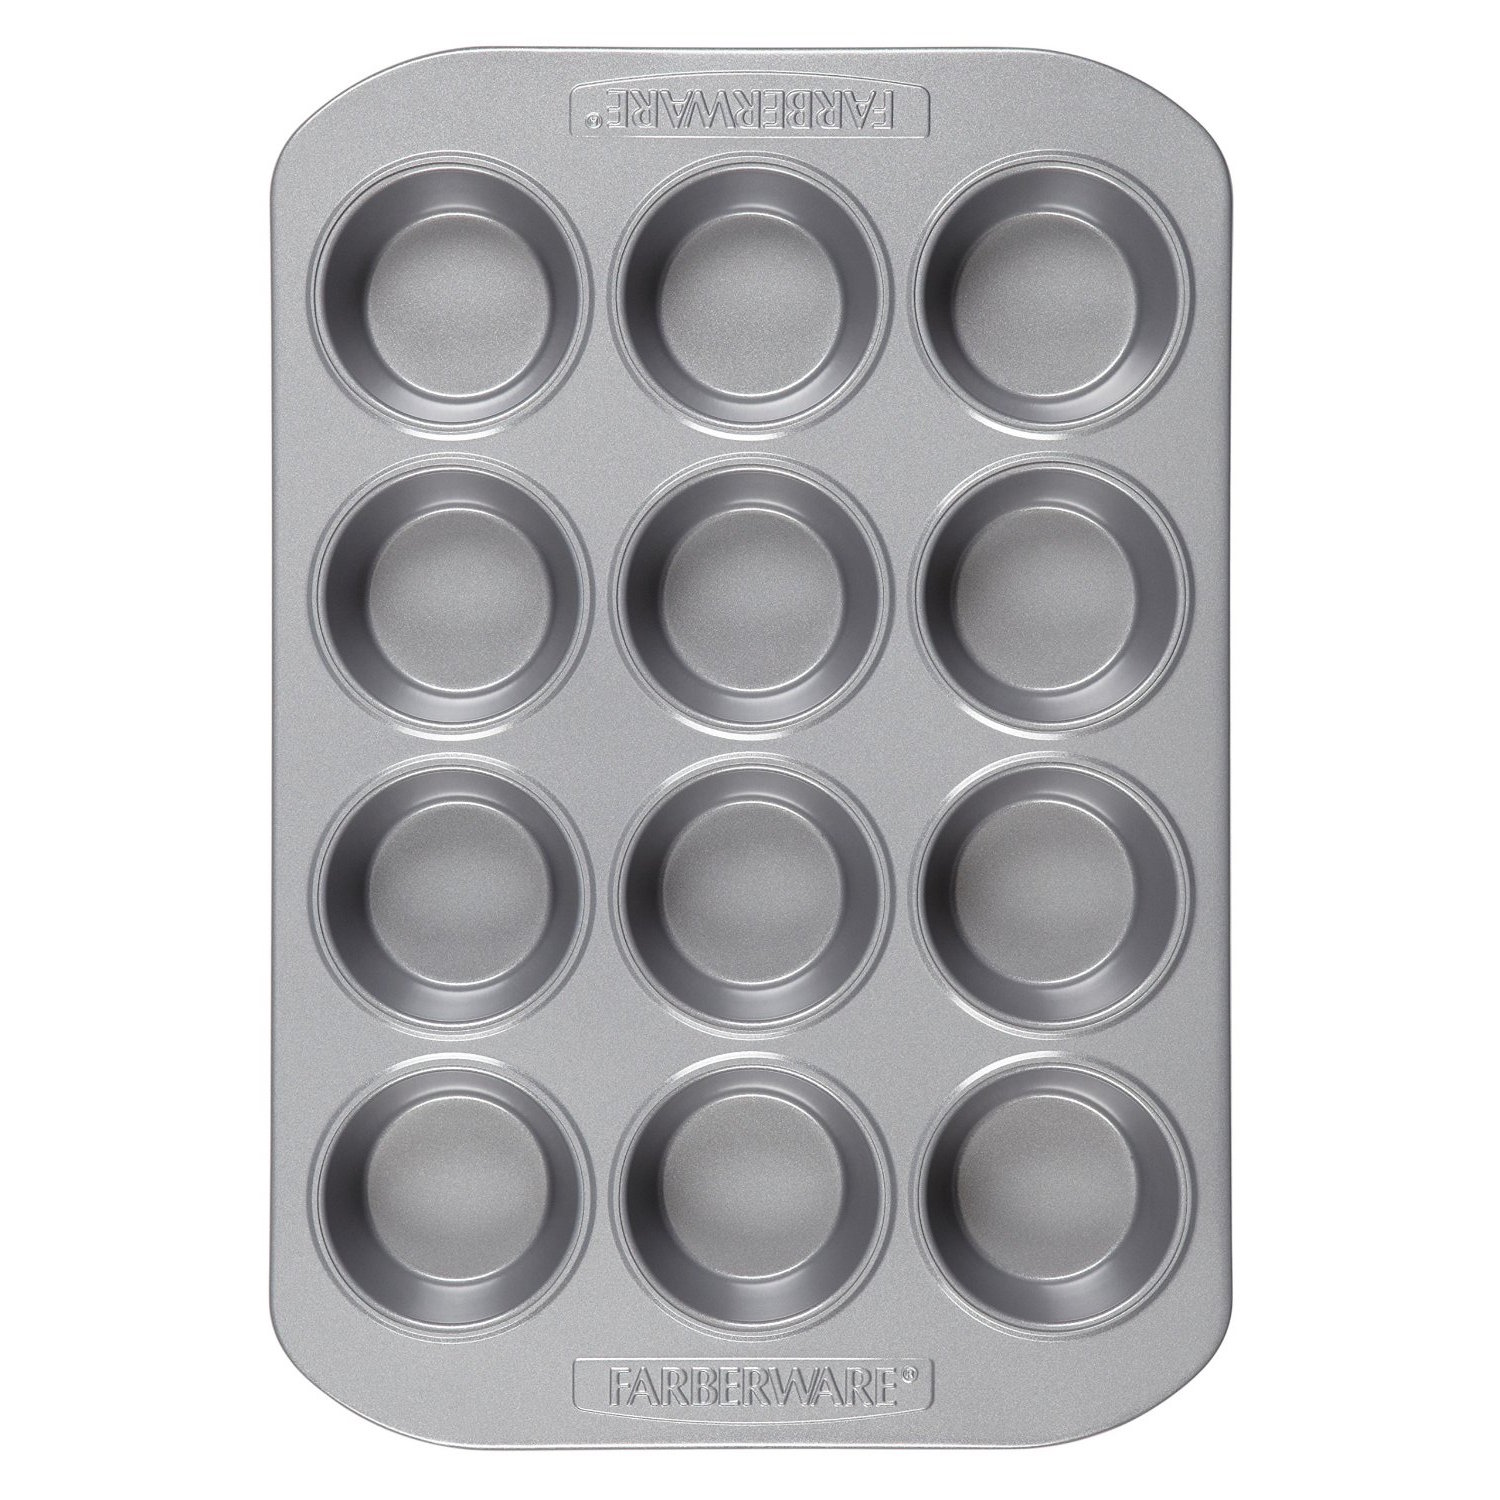 Our favorite muffin tin